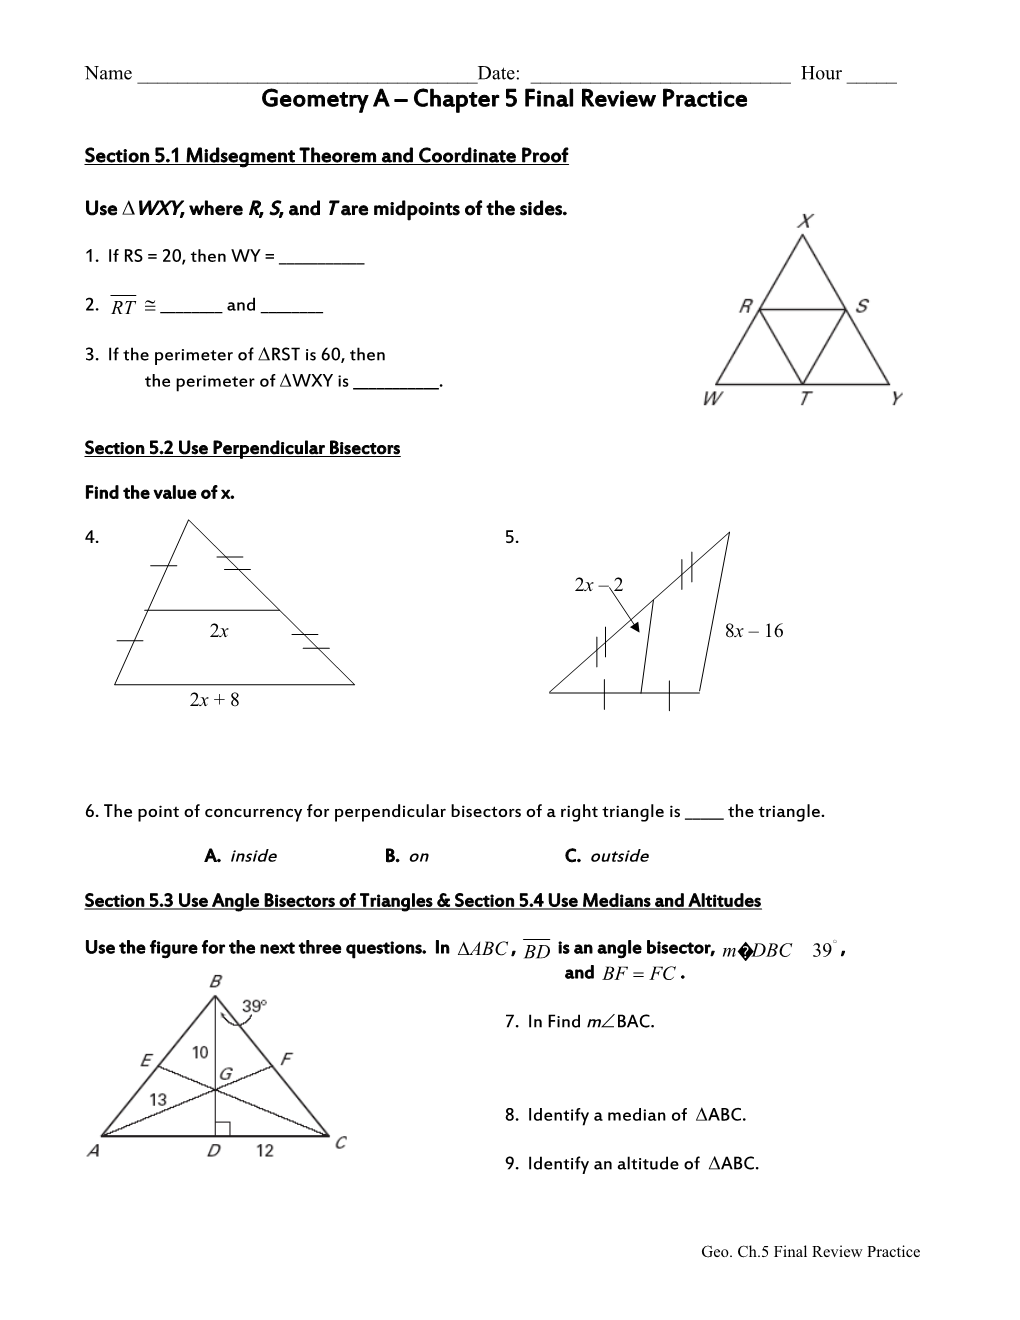 Geometry a Chapter 5 Final Review Practice